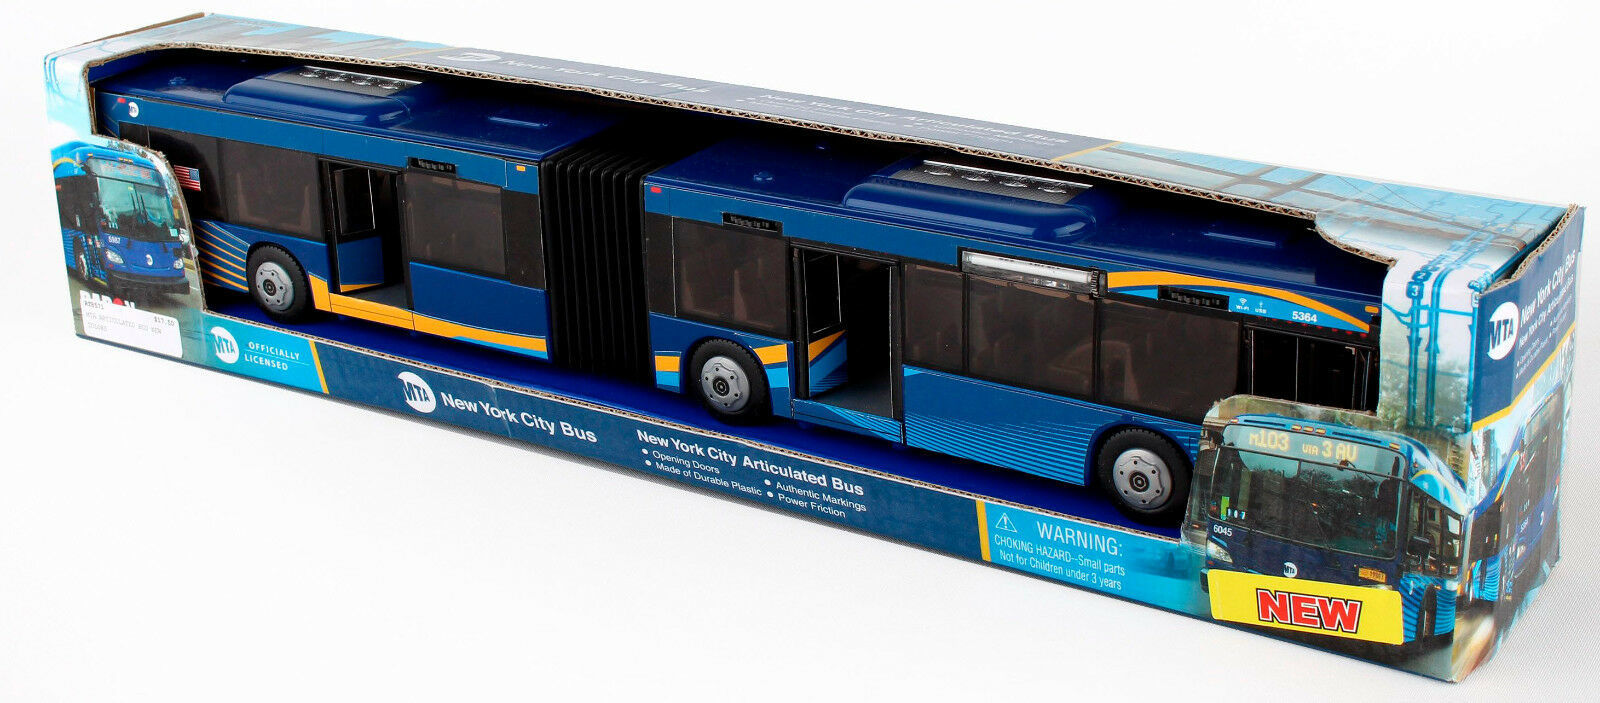 Primary image for MTA Model Bus New York City Articulated Bus New Paint Scheme 1:43 Scale Daron